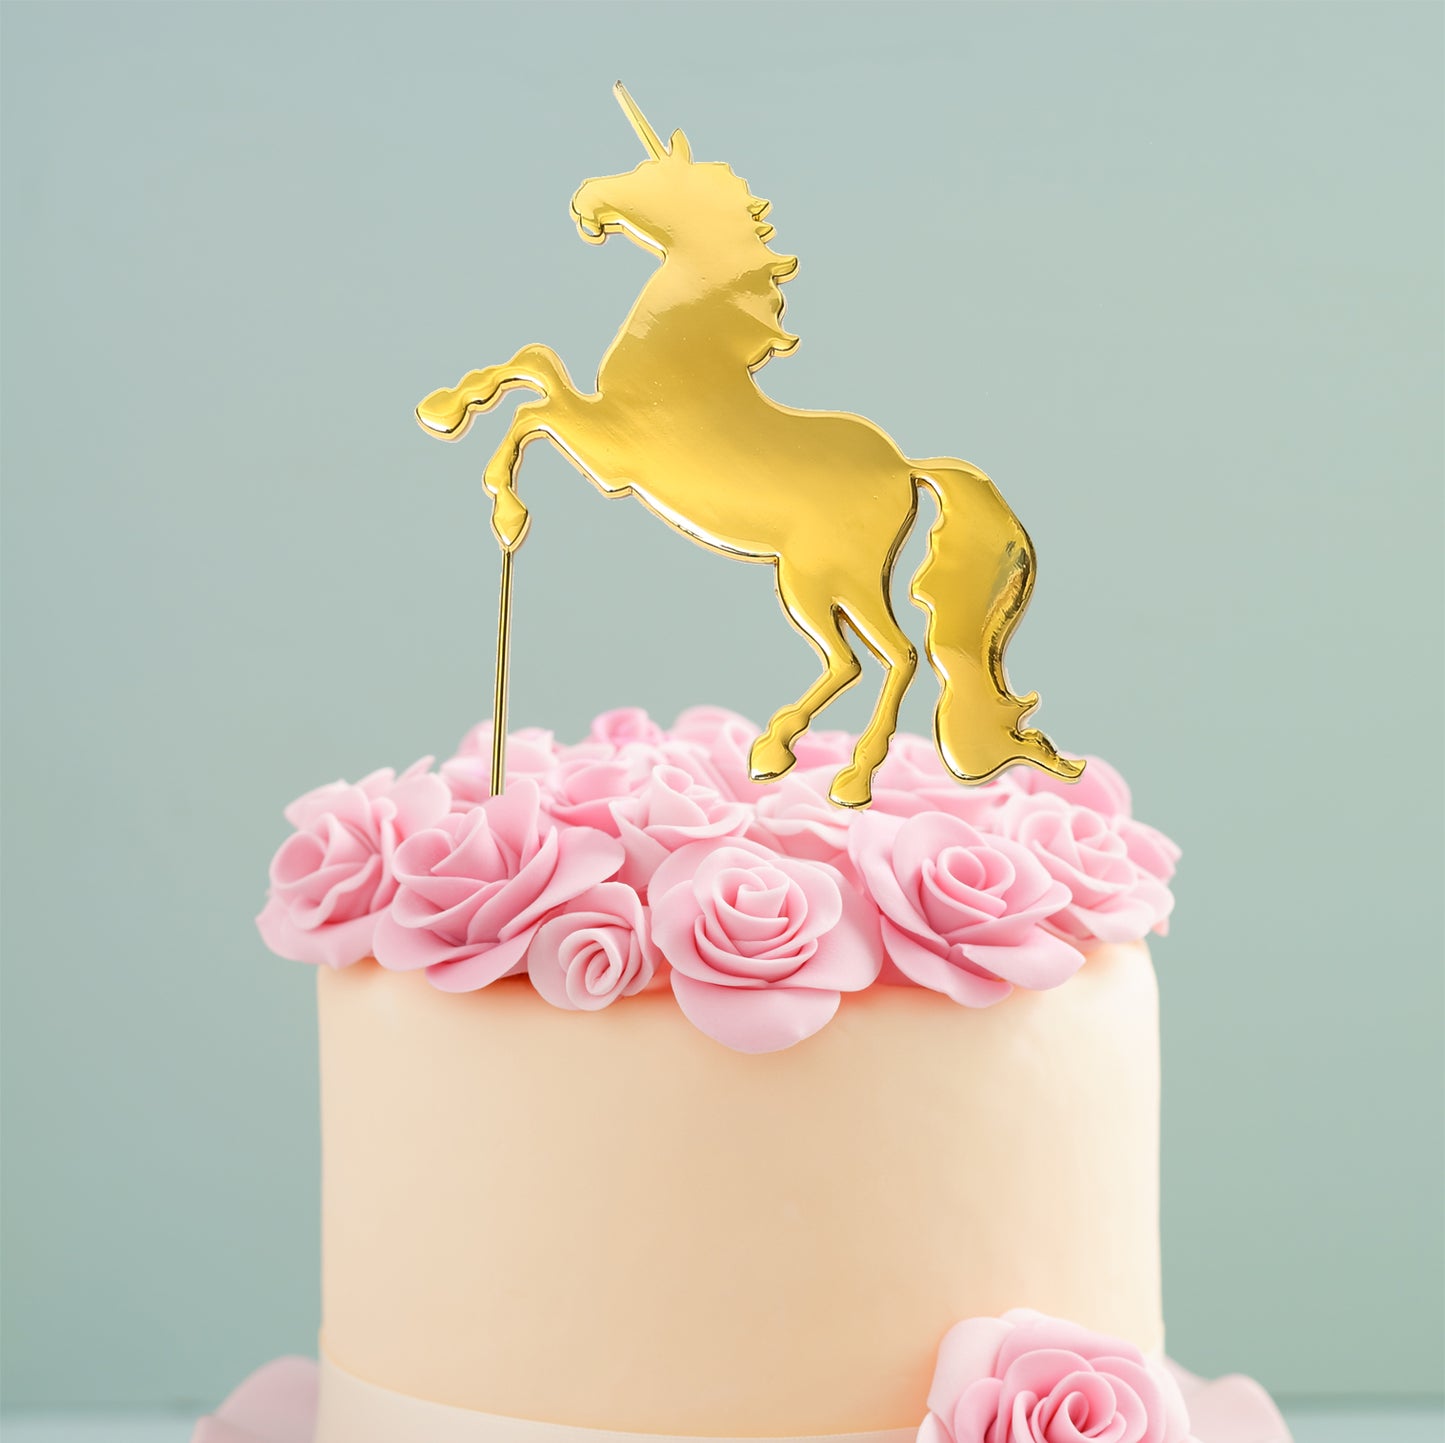 GOLD PLATED CAKE TOPPER - UNICORN GOLD TOPPER